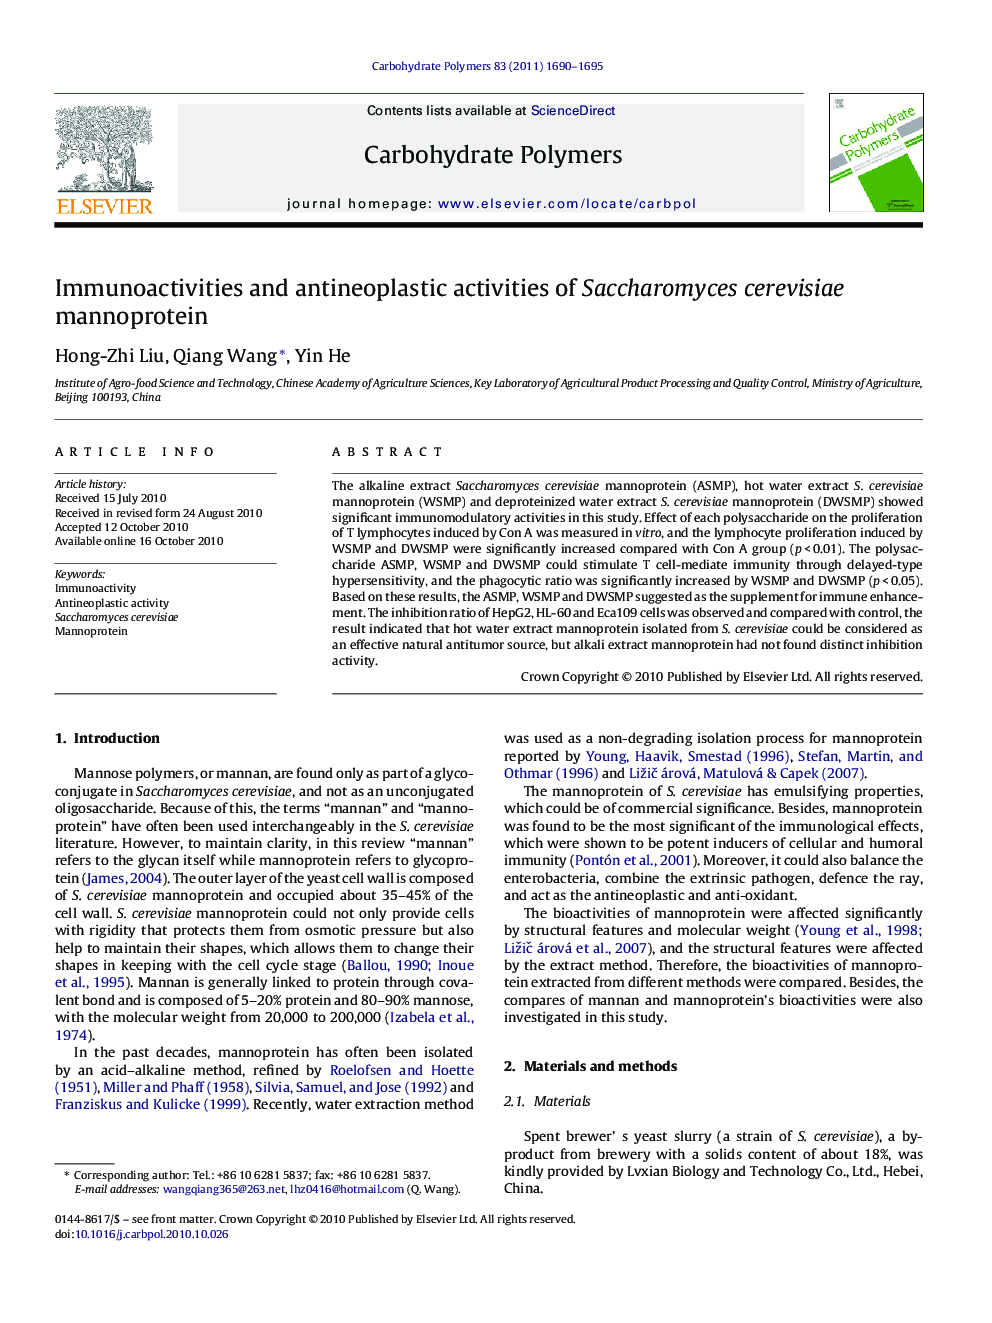 Immunoactivities and antineoplastic activities of Saccharomyces cerevisiae mannoprotein